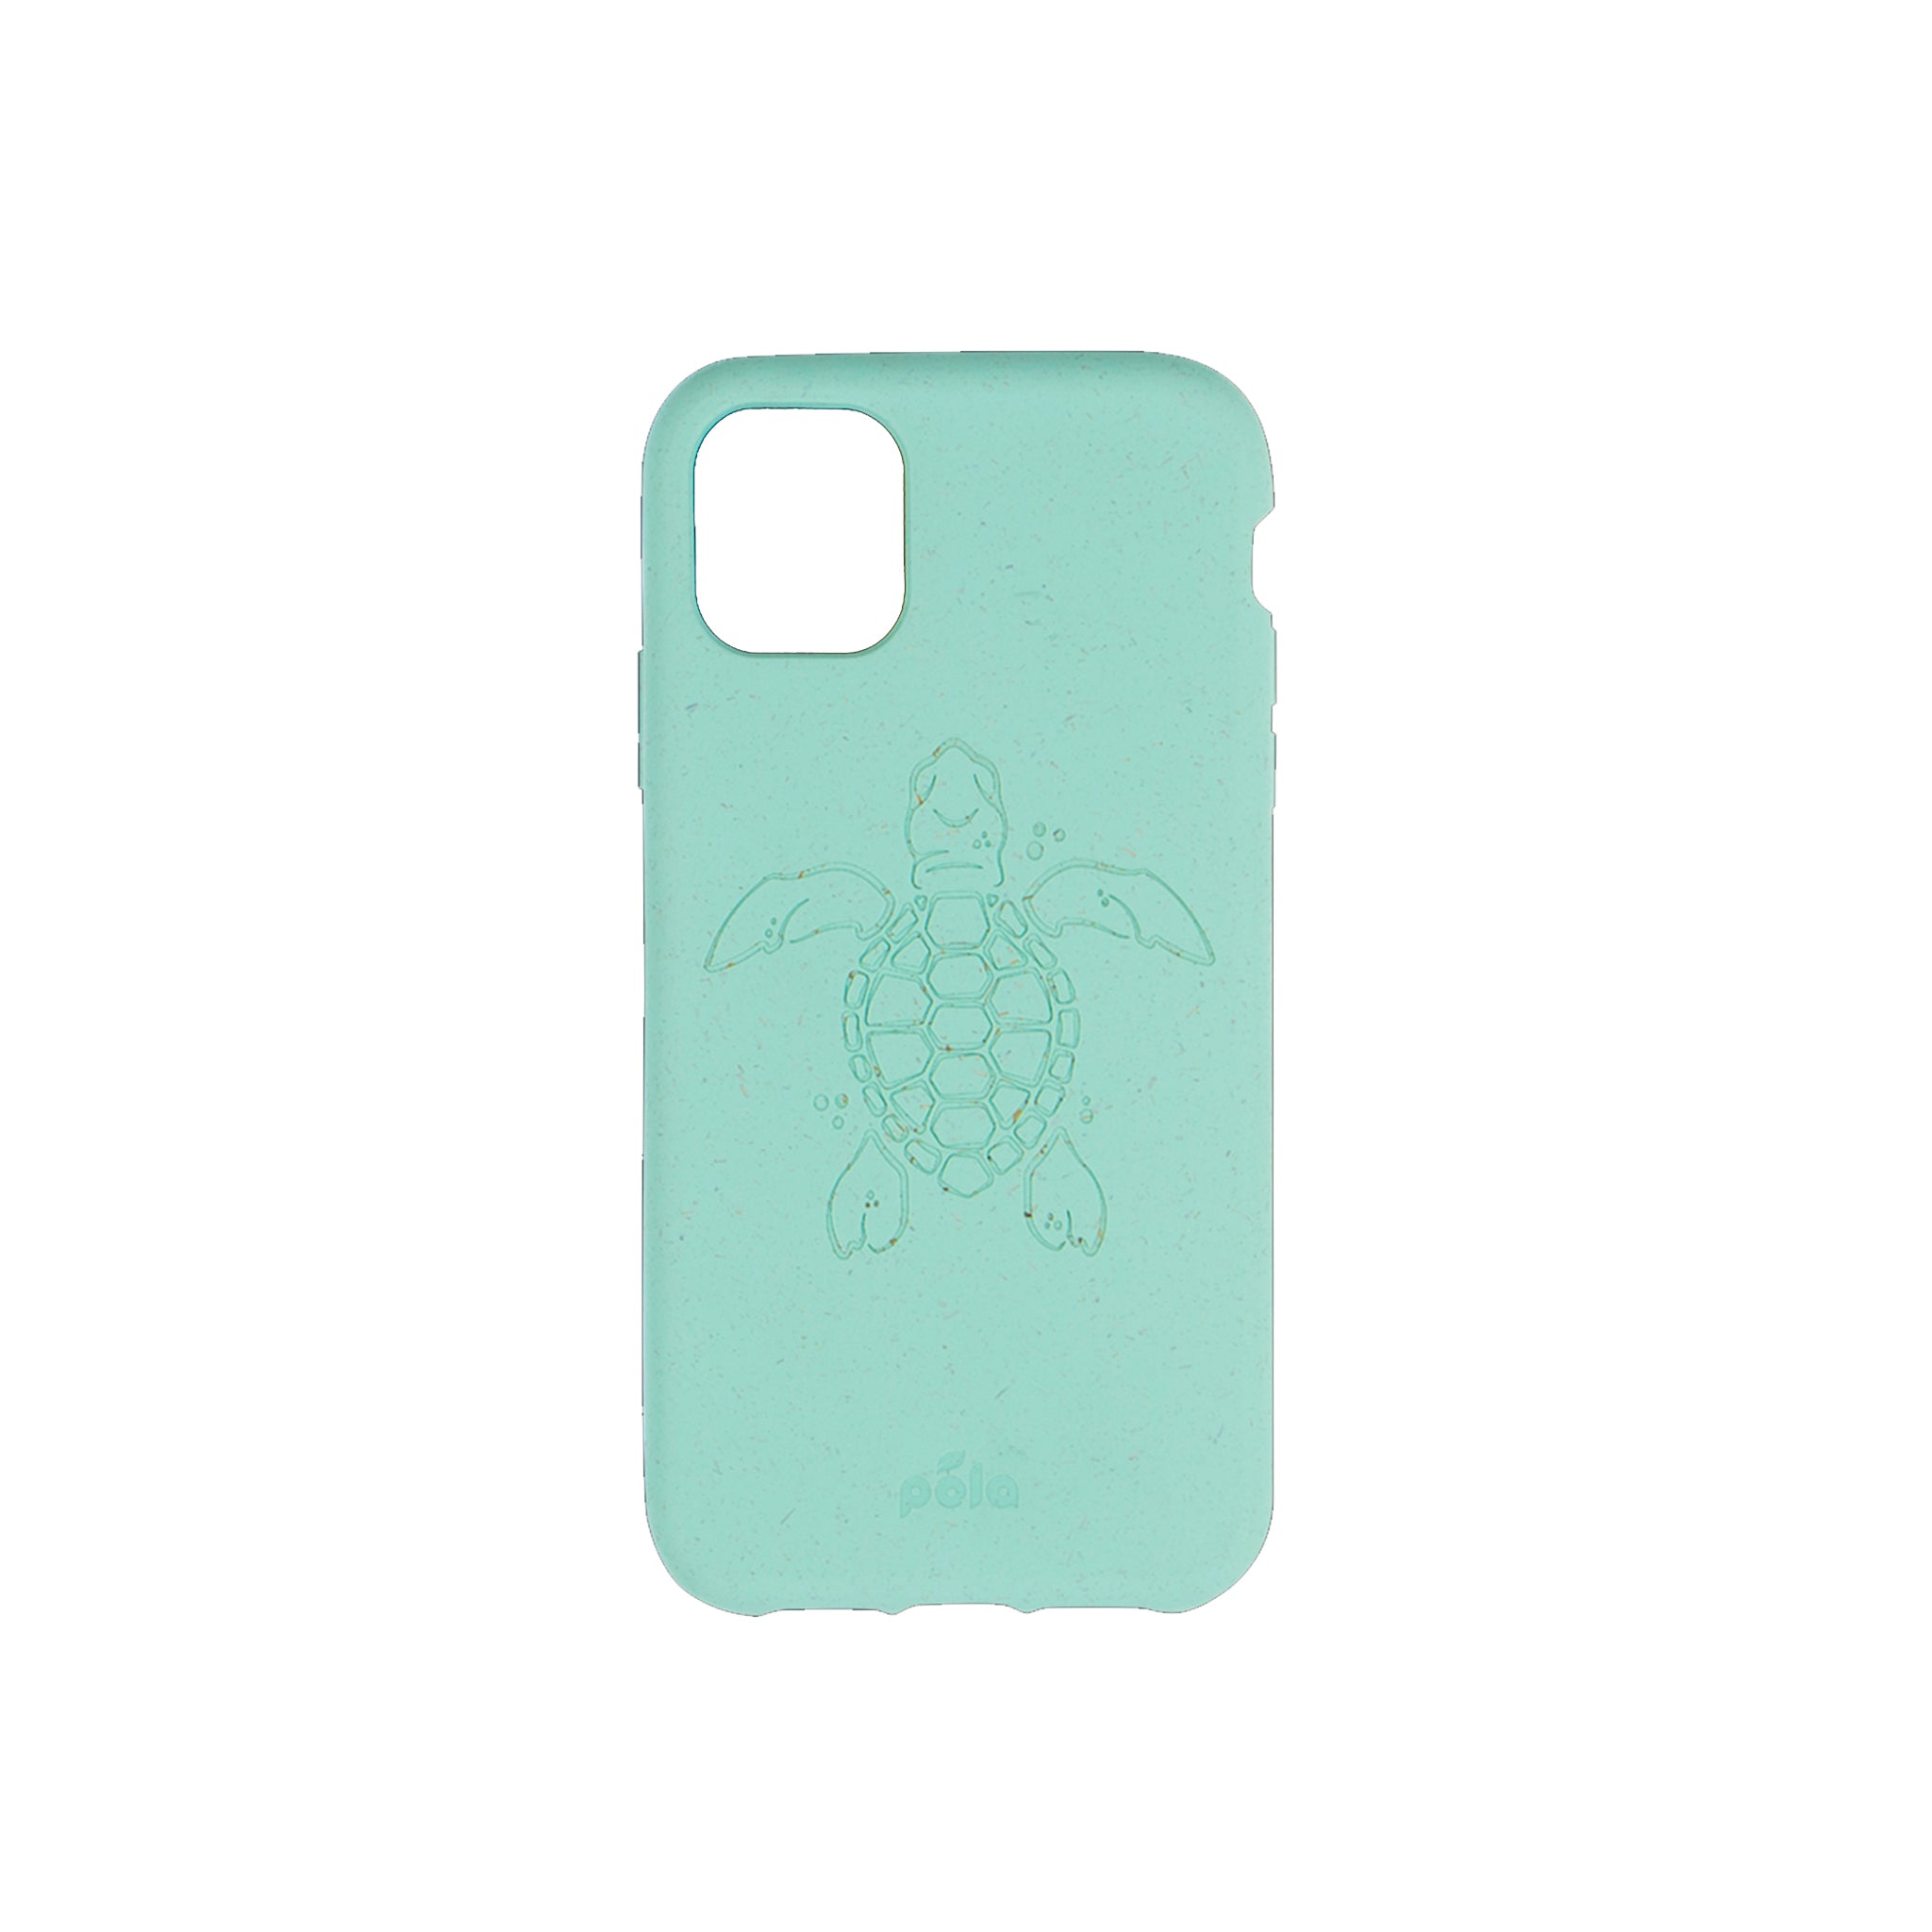 Pela - Eco Friendly Case For Apple Iphone 11 - Ocean Turquoise Turtle Edition